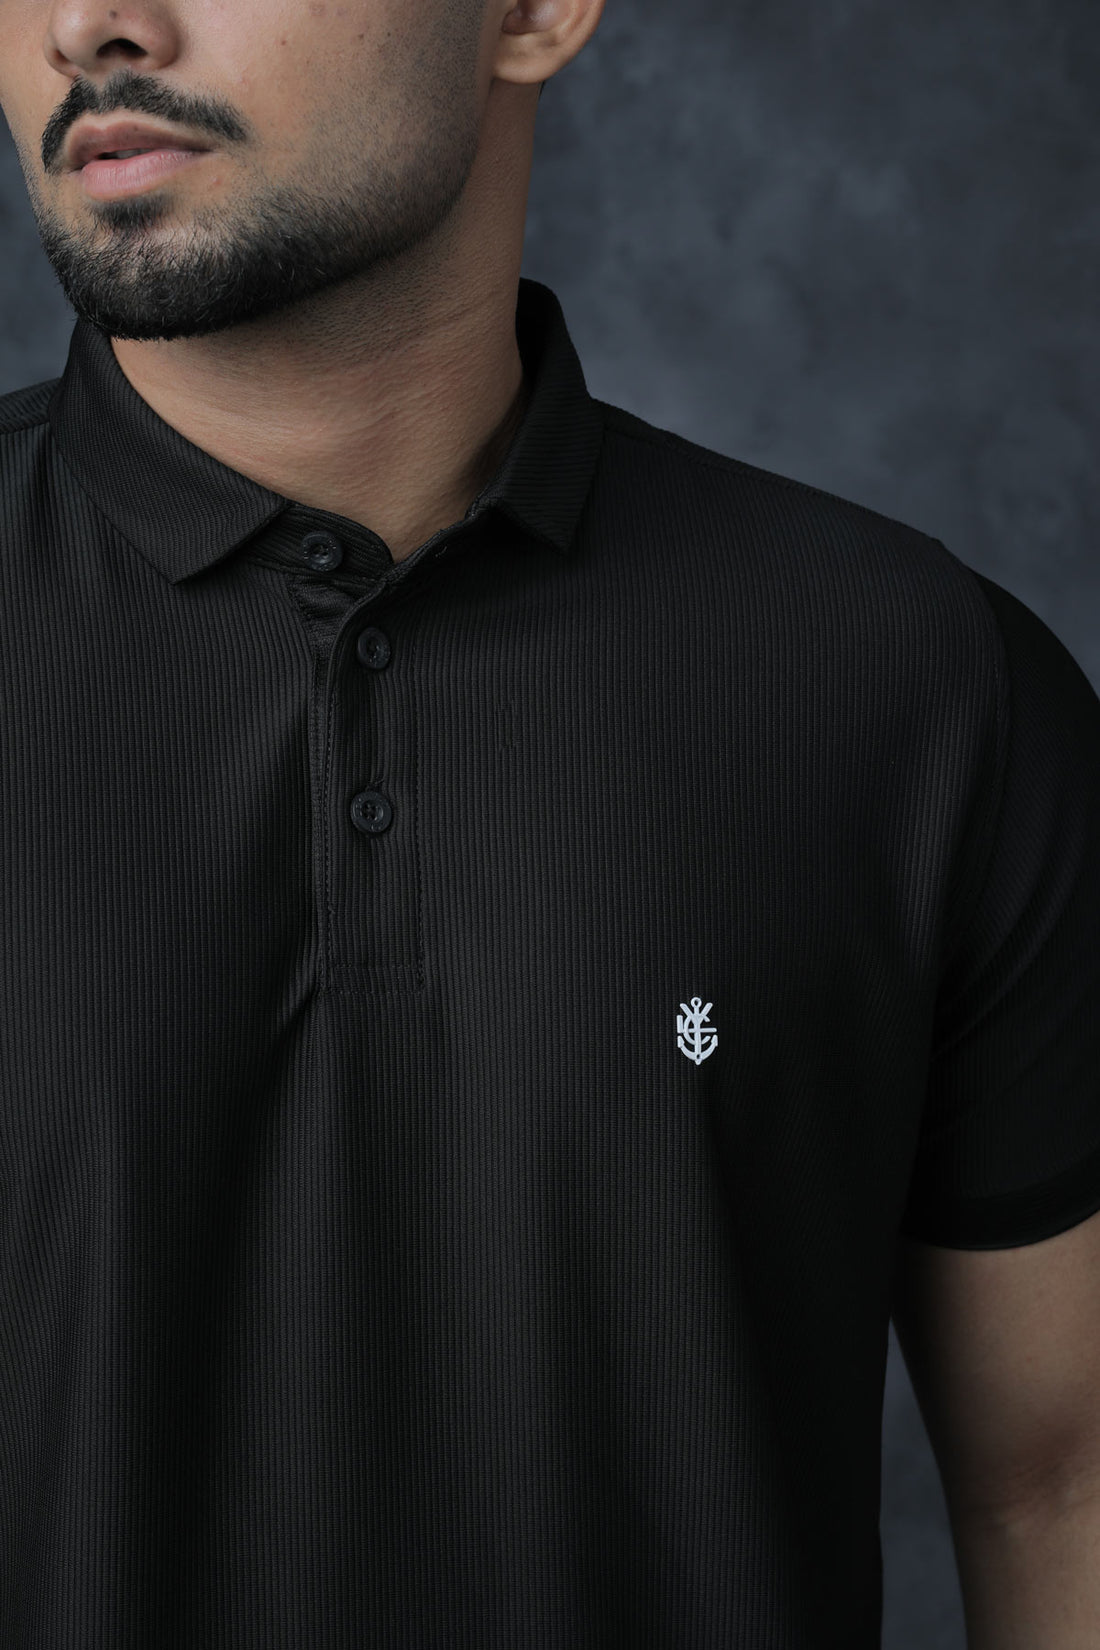 LCY | Structured Verical Stripe Polo LCY